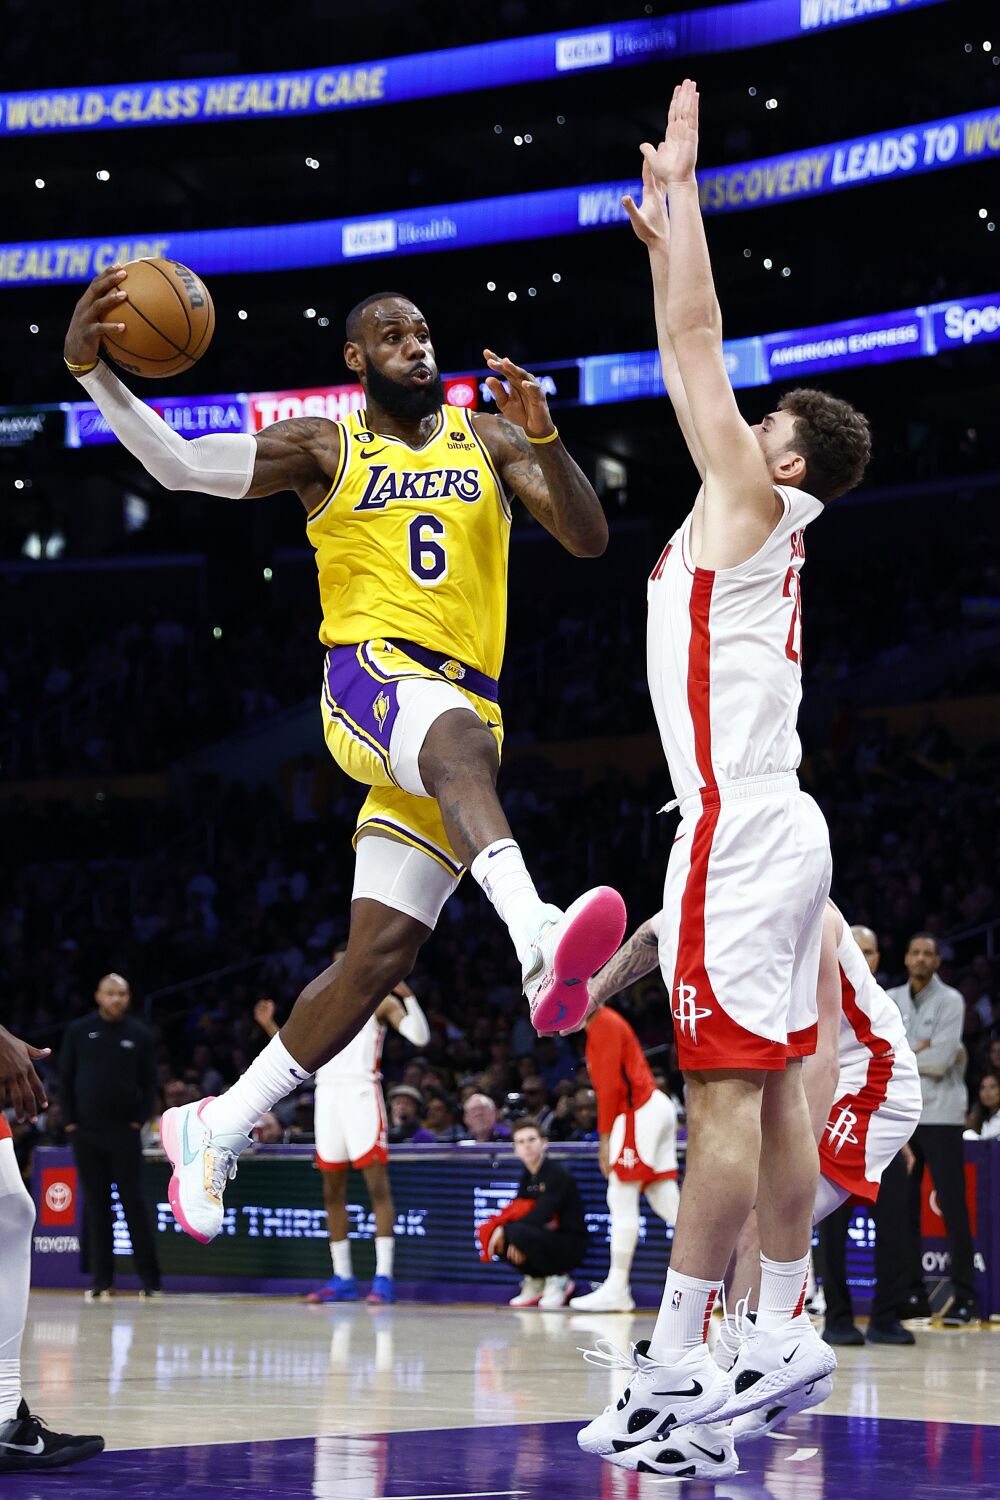 LeBron James ends Lakers' losing streak with season-high 48 points vs. Rockets